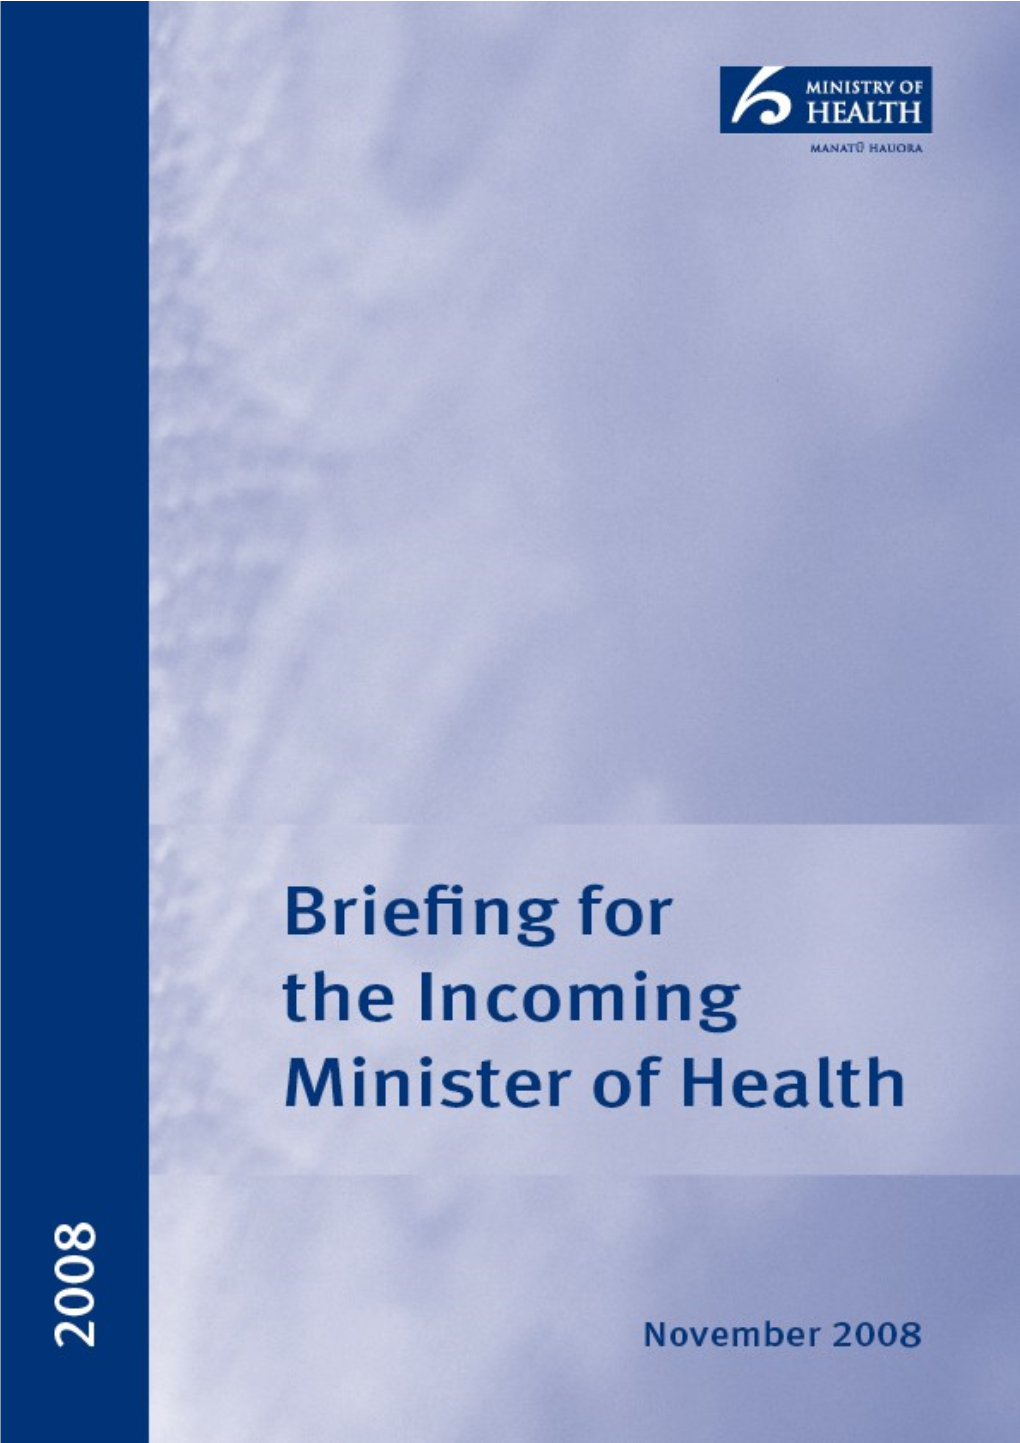 Briefing for the Incoming Minister of Health